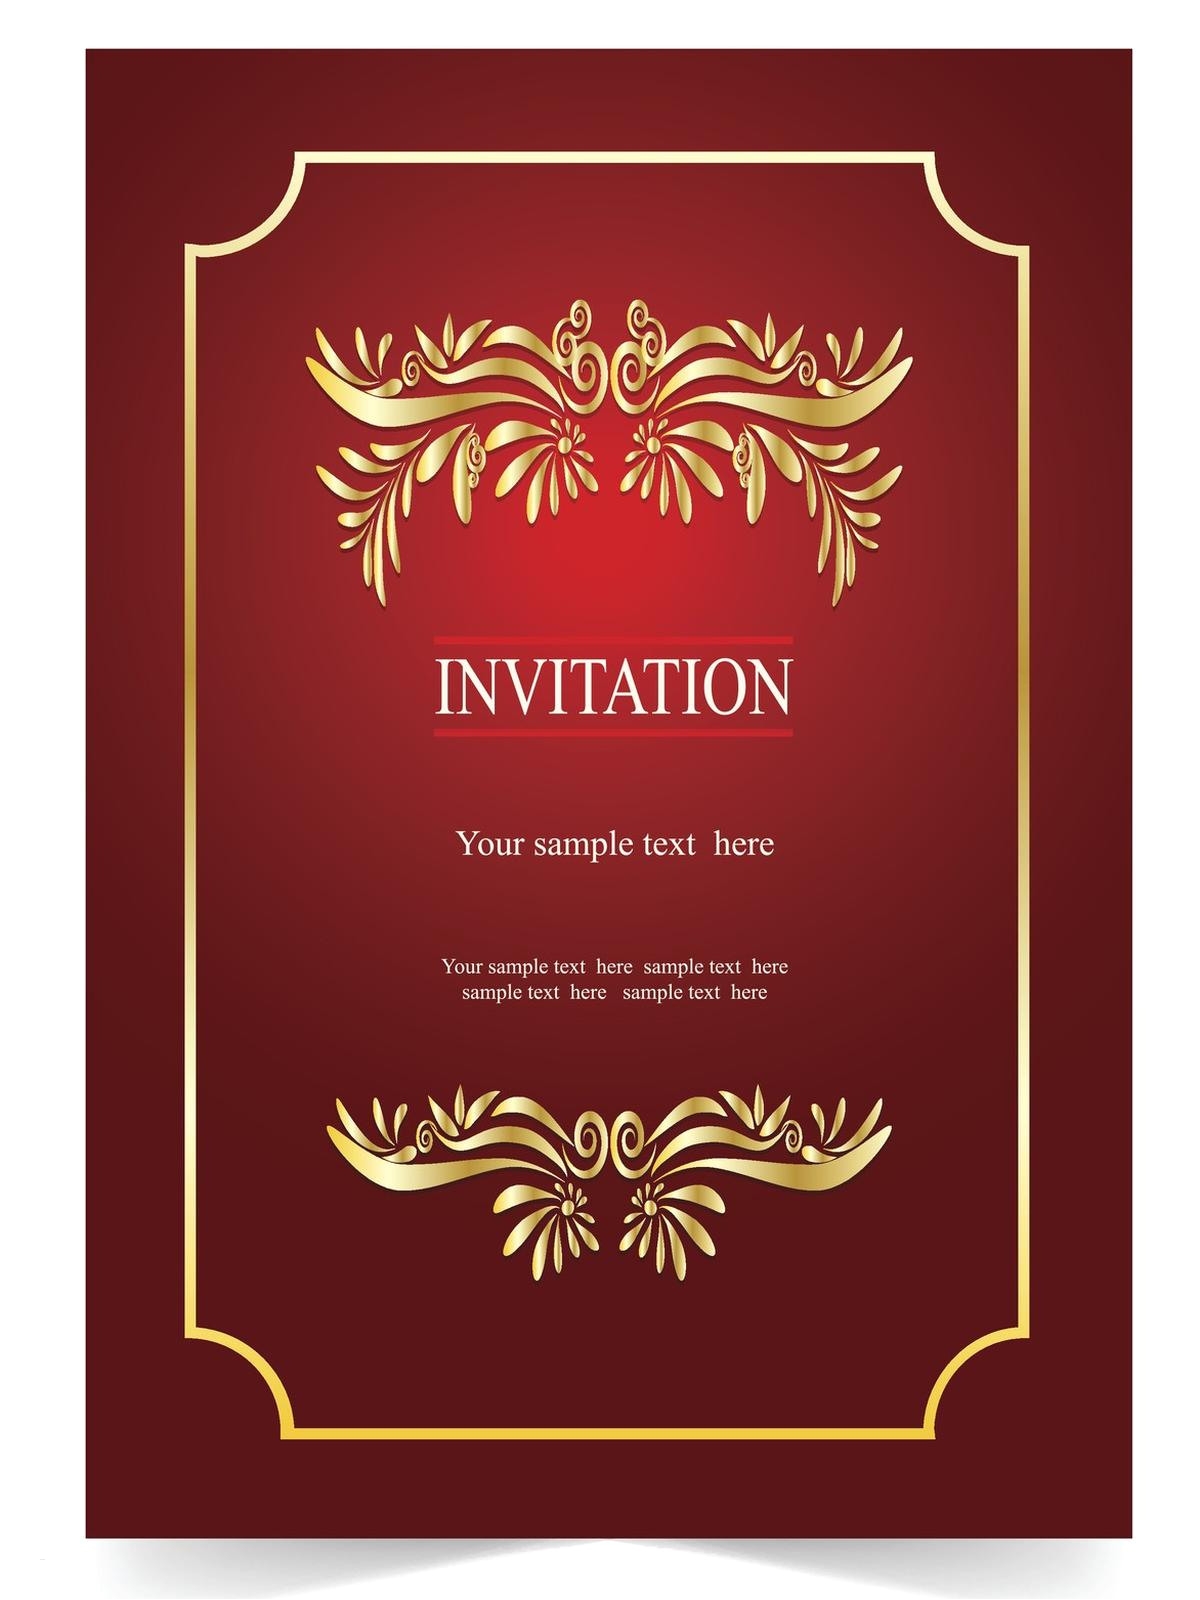 dinner invitations samples awesome amazing teacher retirement party invitation resume ideas